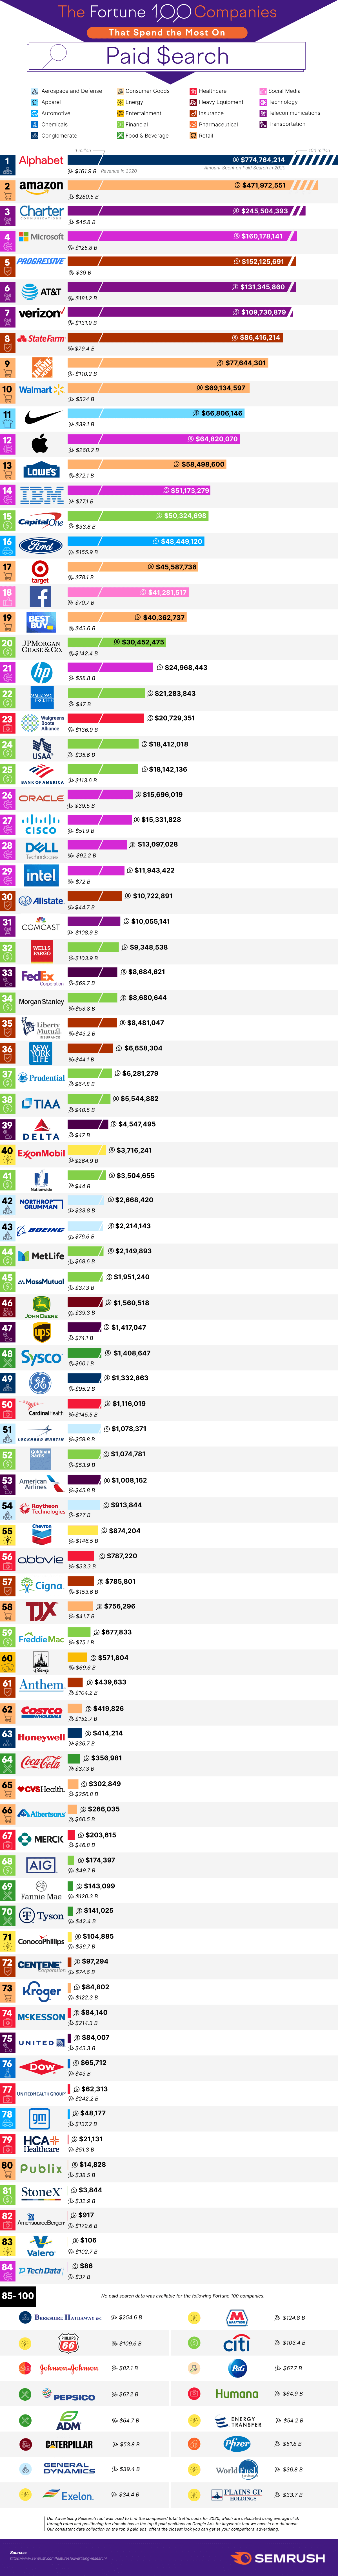 The Major Companies That Spend the Most Money on Paid Search